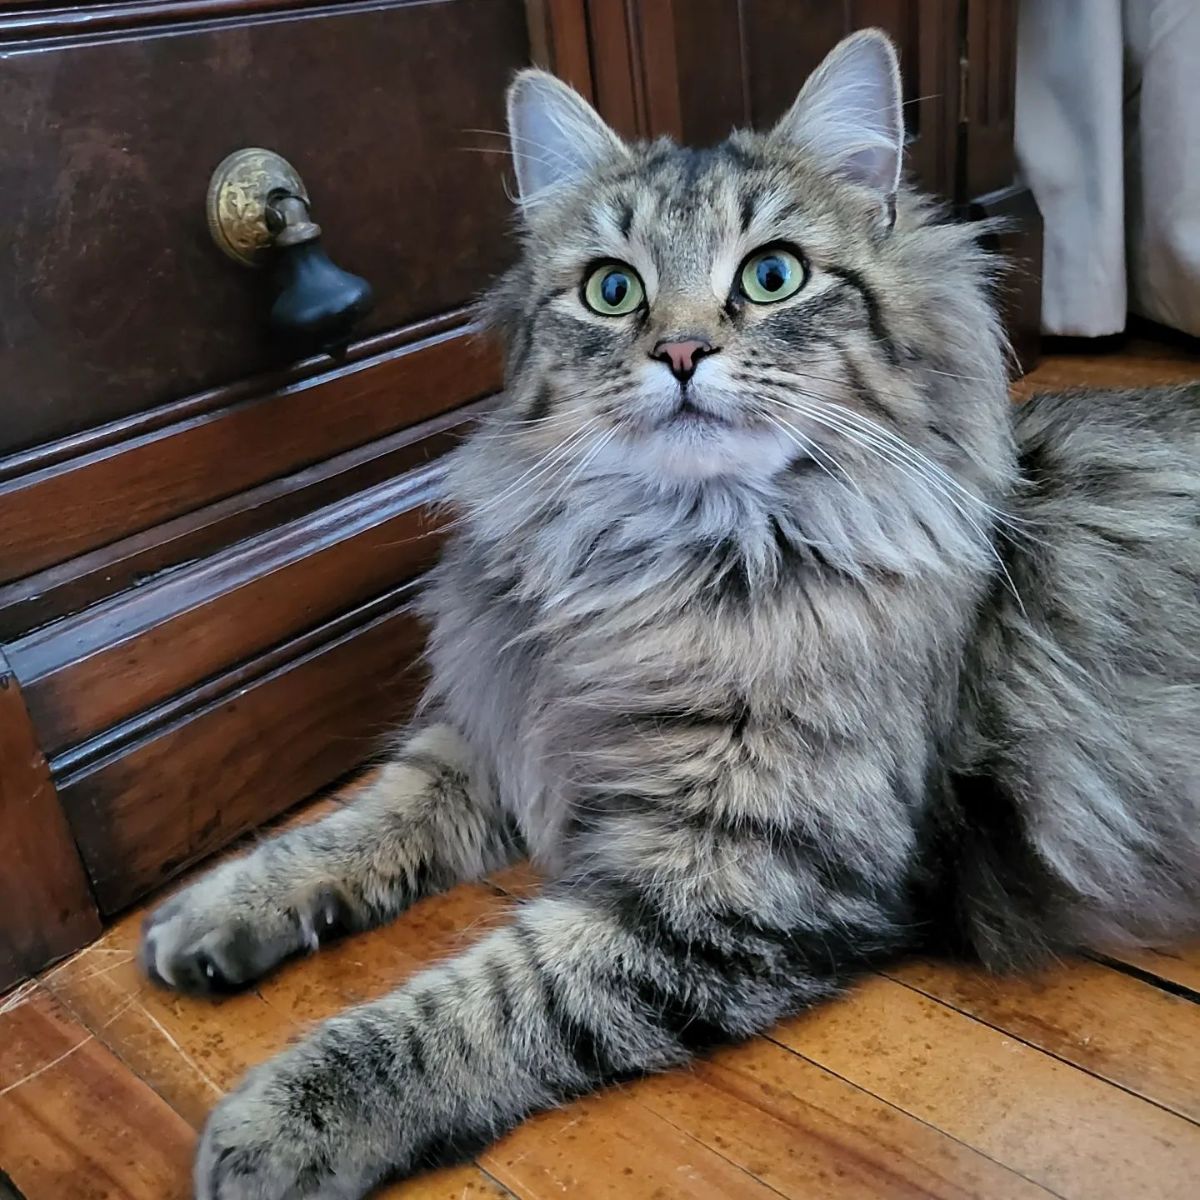 A fluffy tabby maine coon lying on a floor next to a wooden piece of furniture.